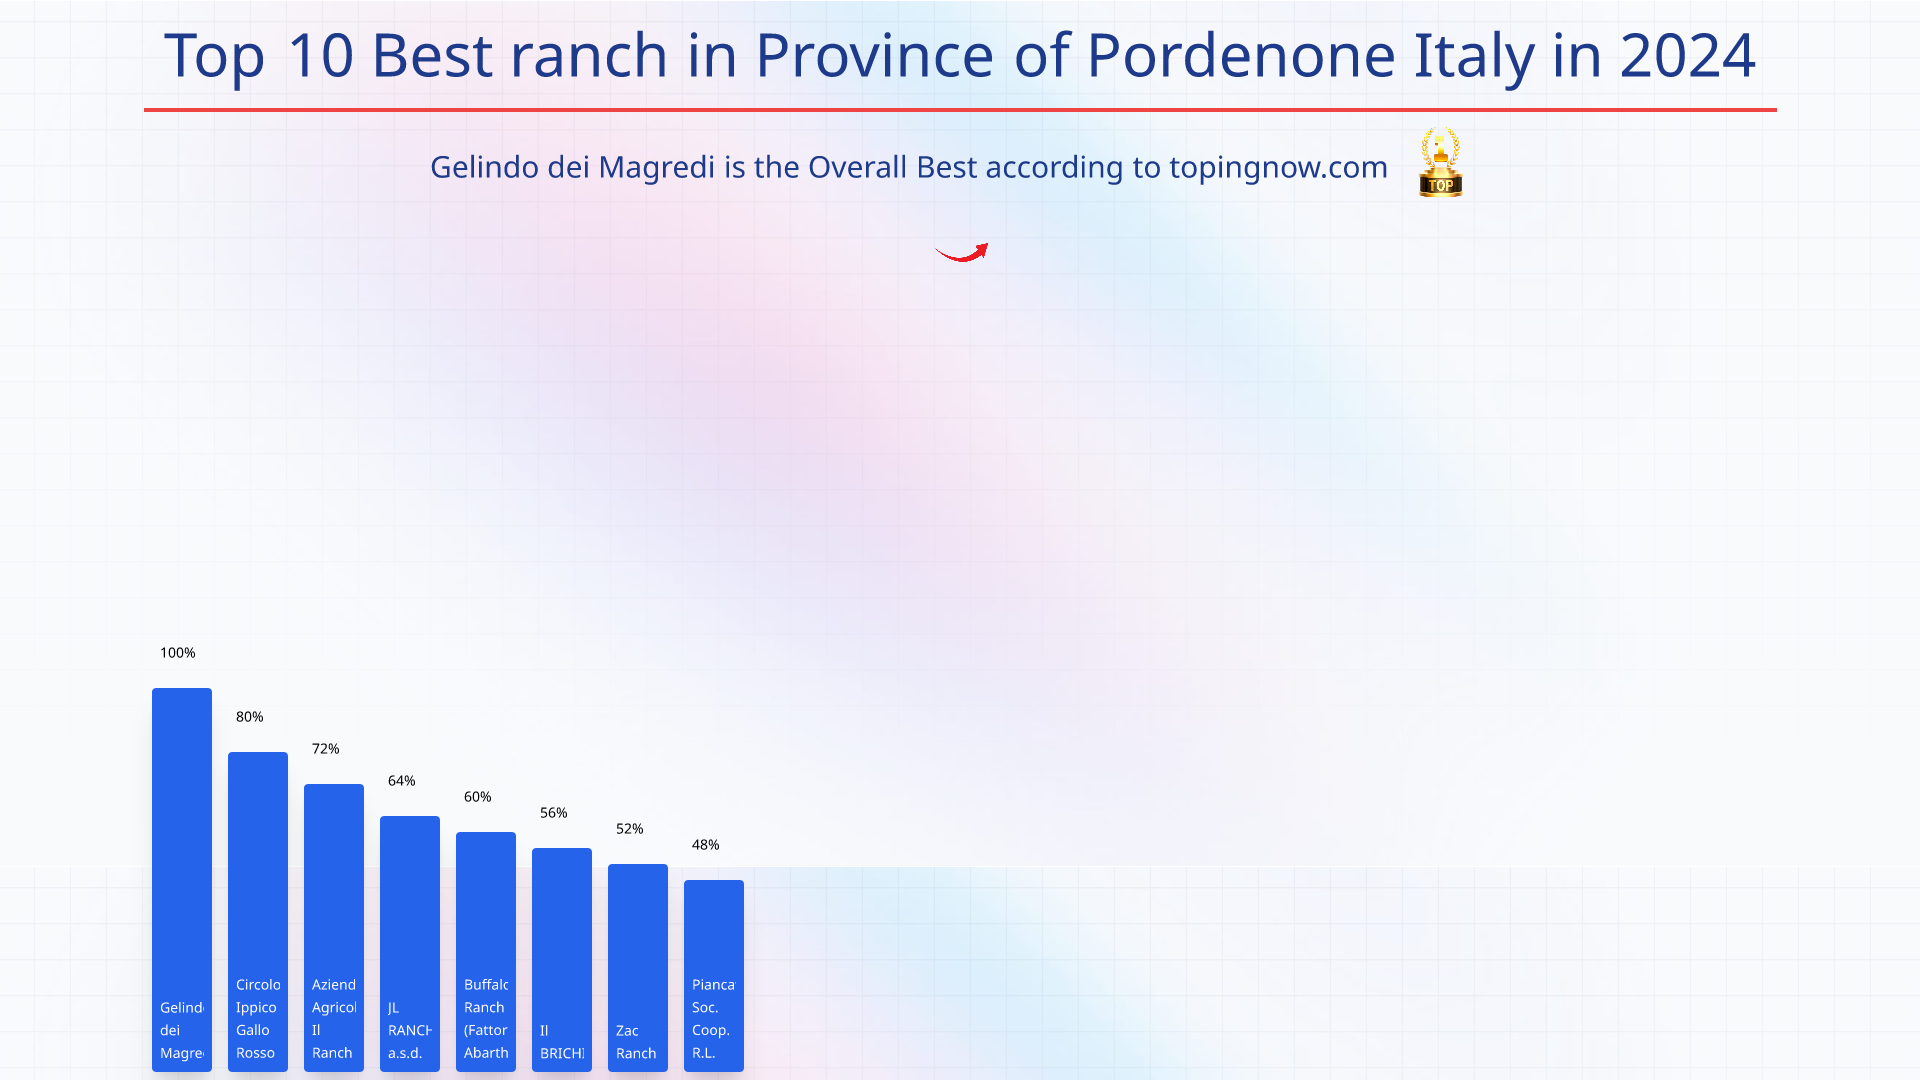 Top 10 Best ranch in Province of Pordenone Italy in 2024: Top 10 Best ranch in Province of Pordenone Italy in 2024